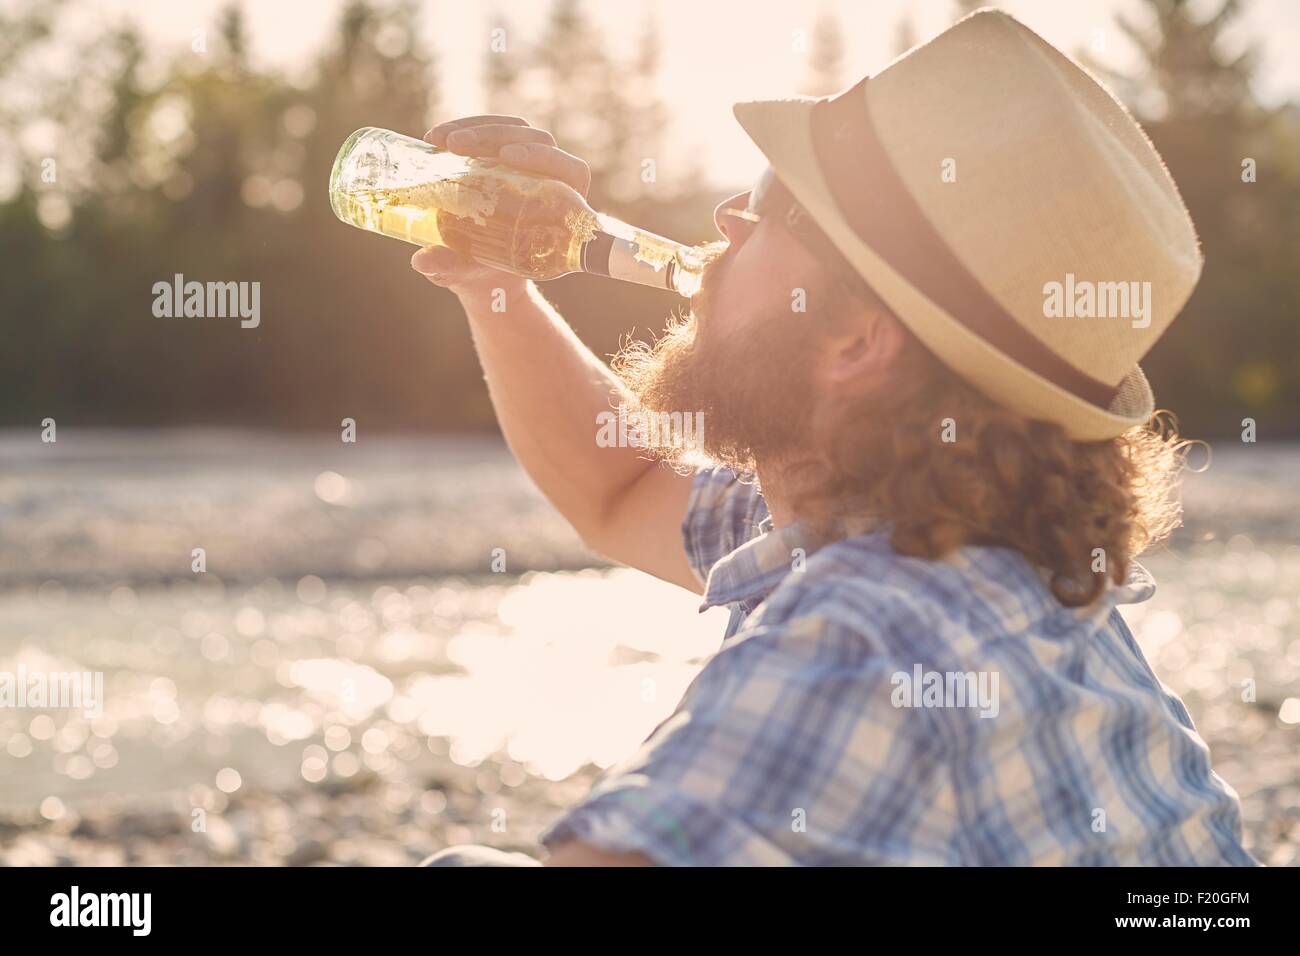 Side view of mid adult man wearing hat drinking beer from beer bottle Stock Photo